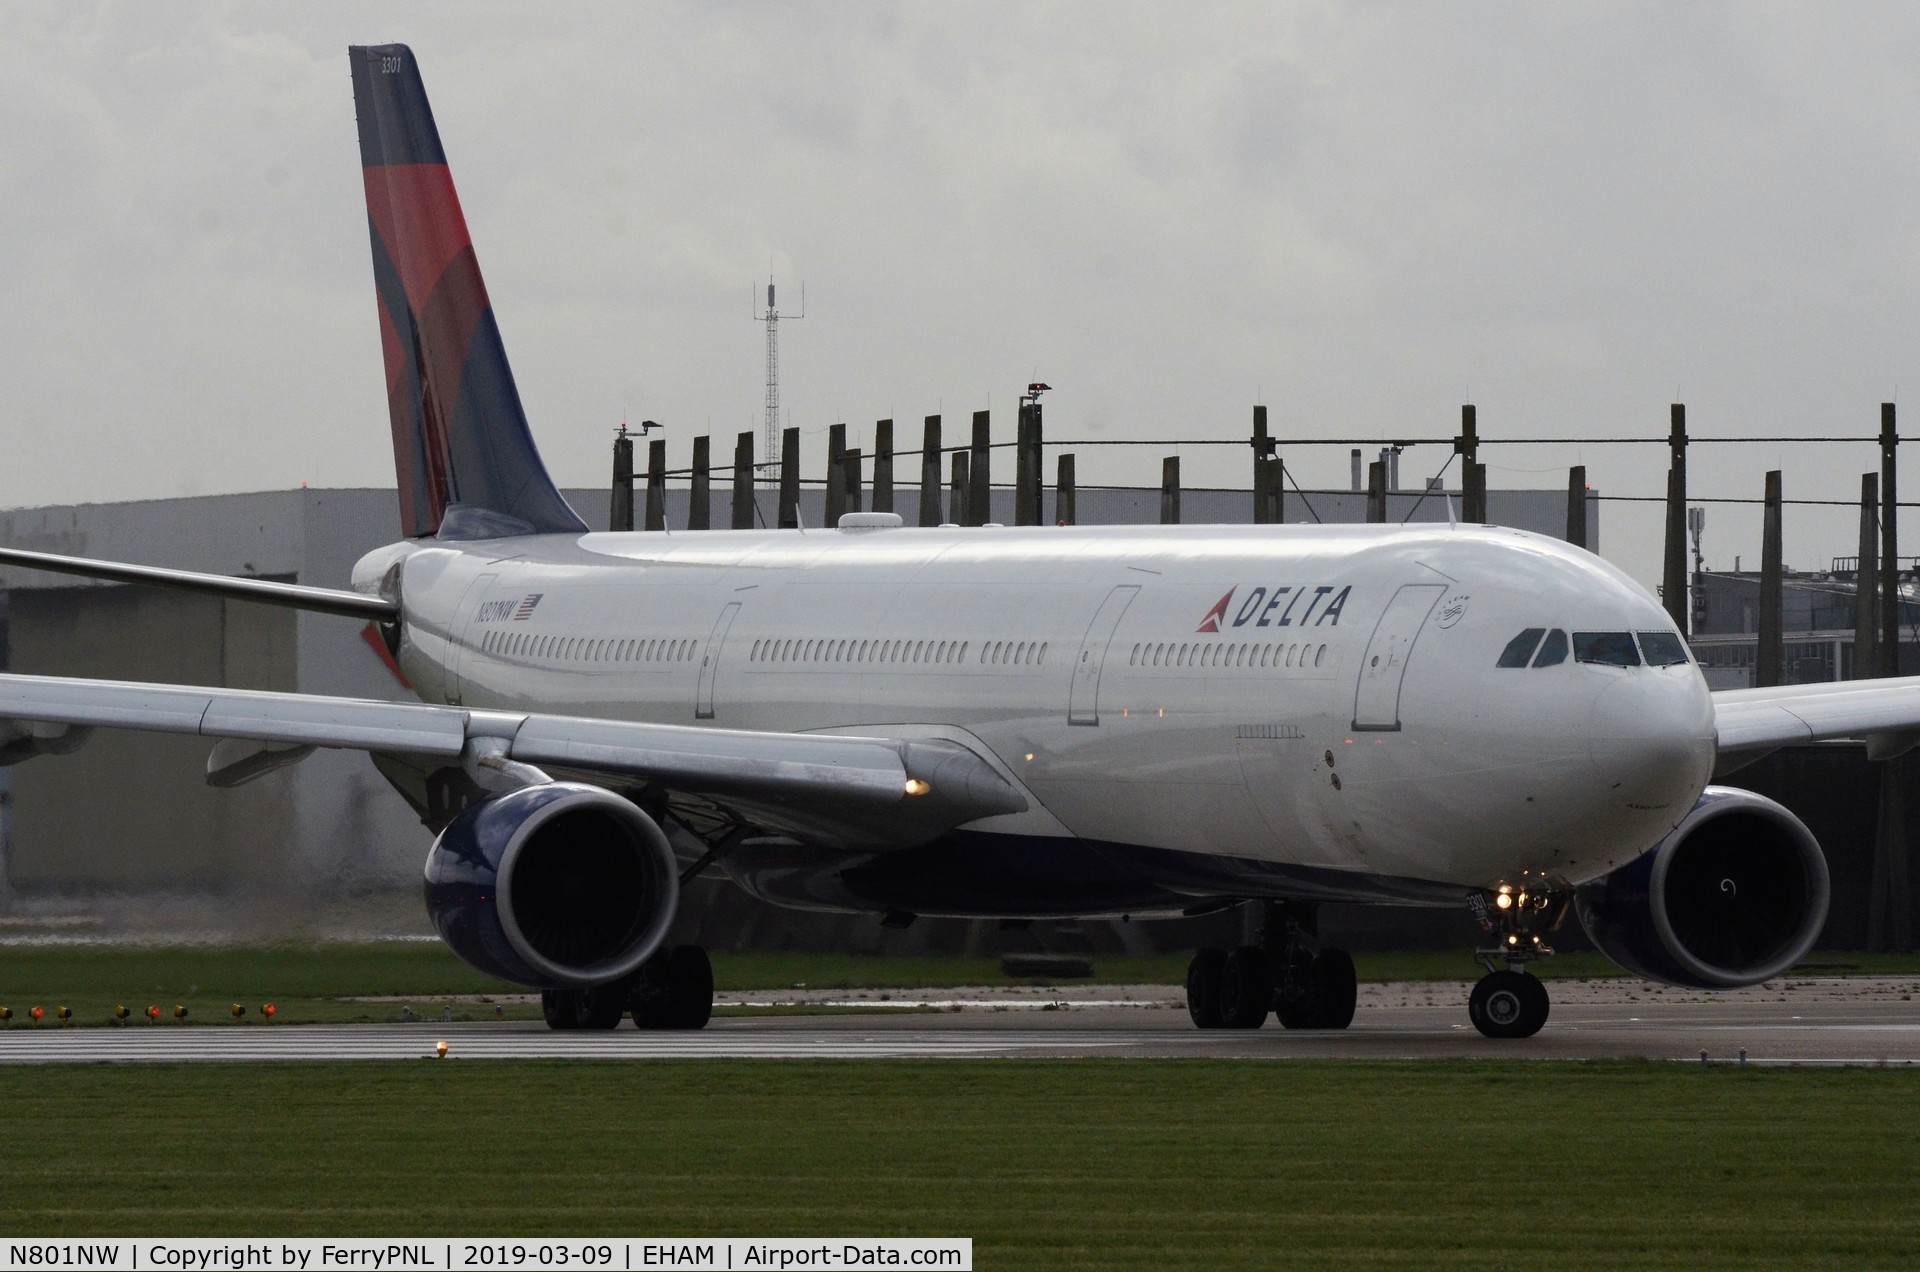 N801NW, 2003 Airbus A330-323 C/N 0524, Delta A333 lining-up